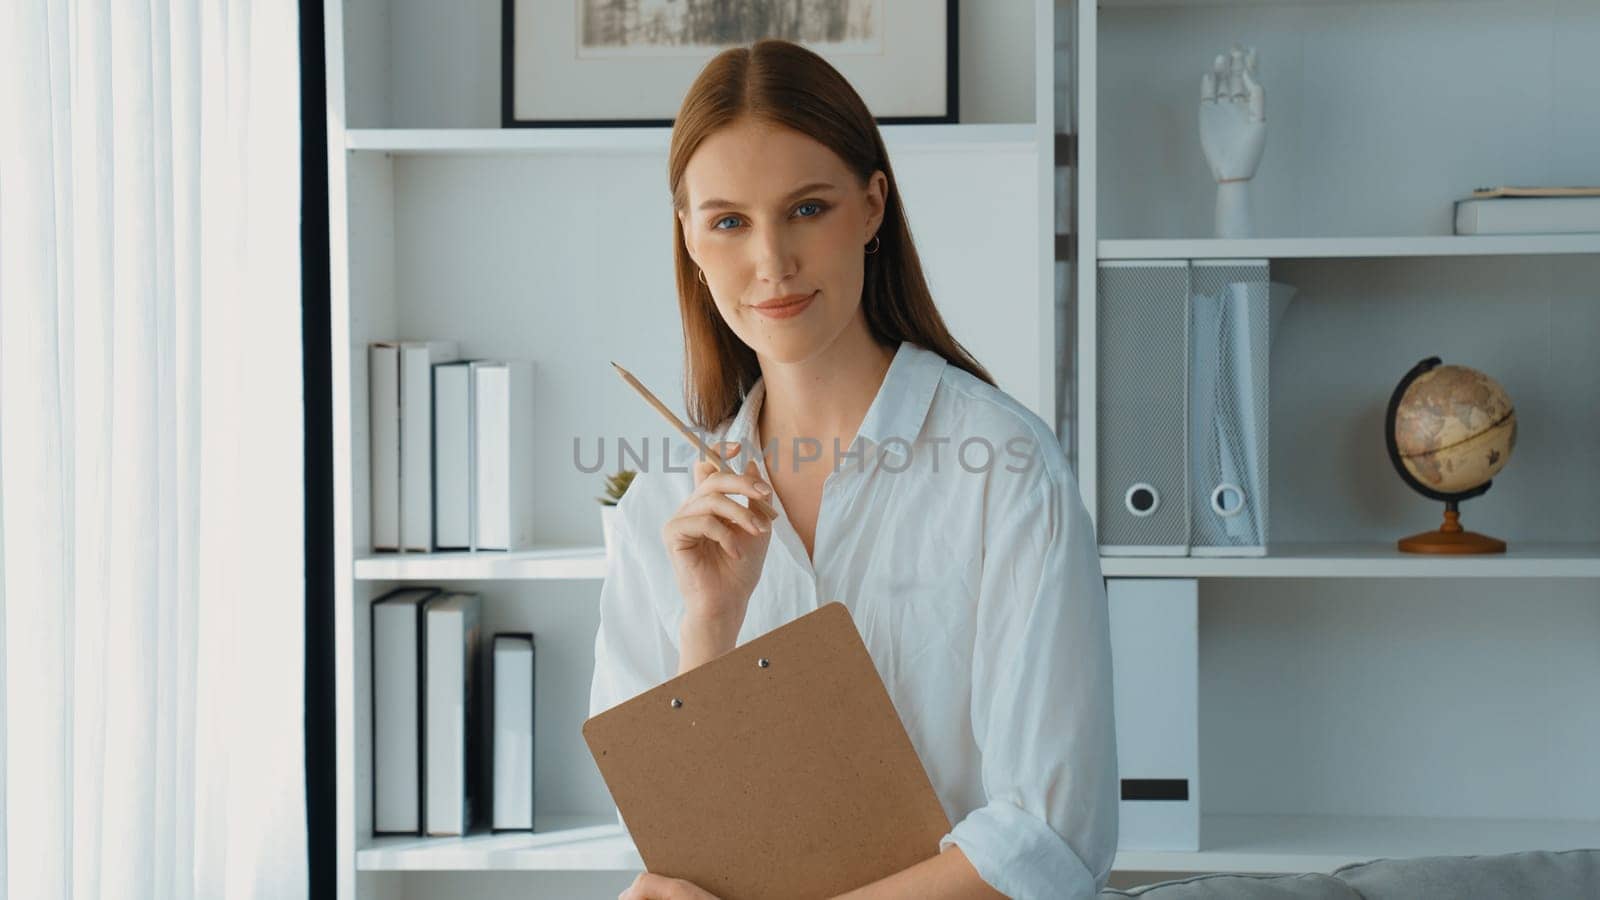 Prim psychologist woman in clinic office professional portrait by biancoblue